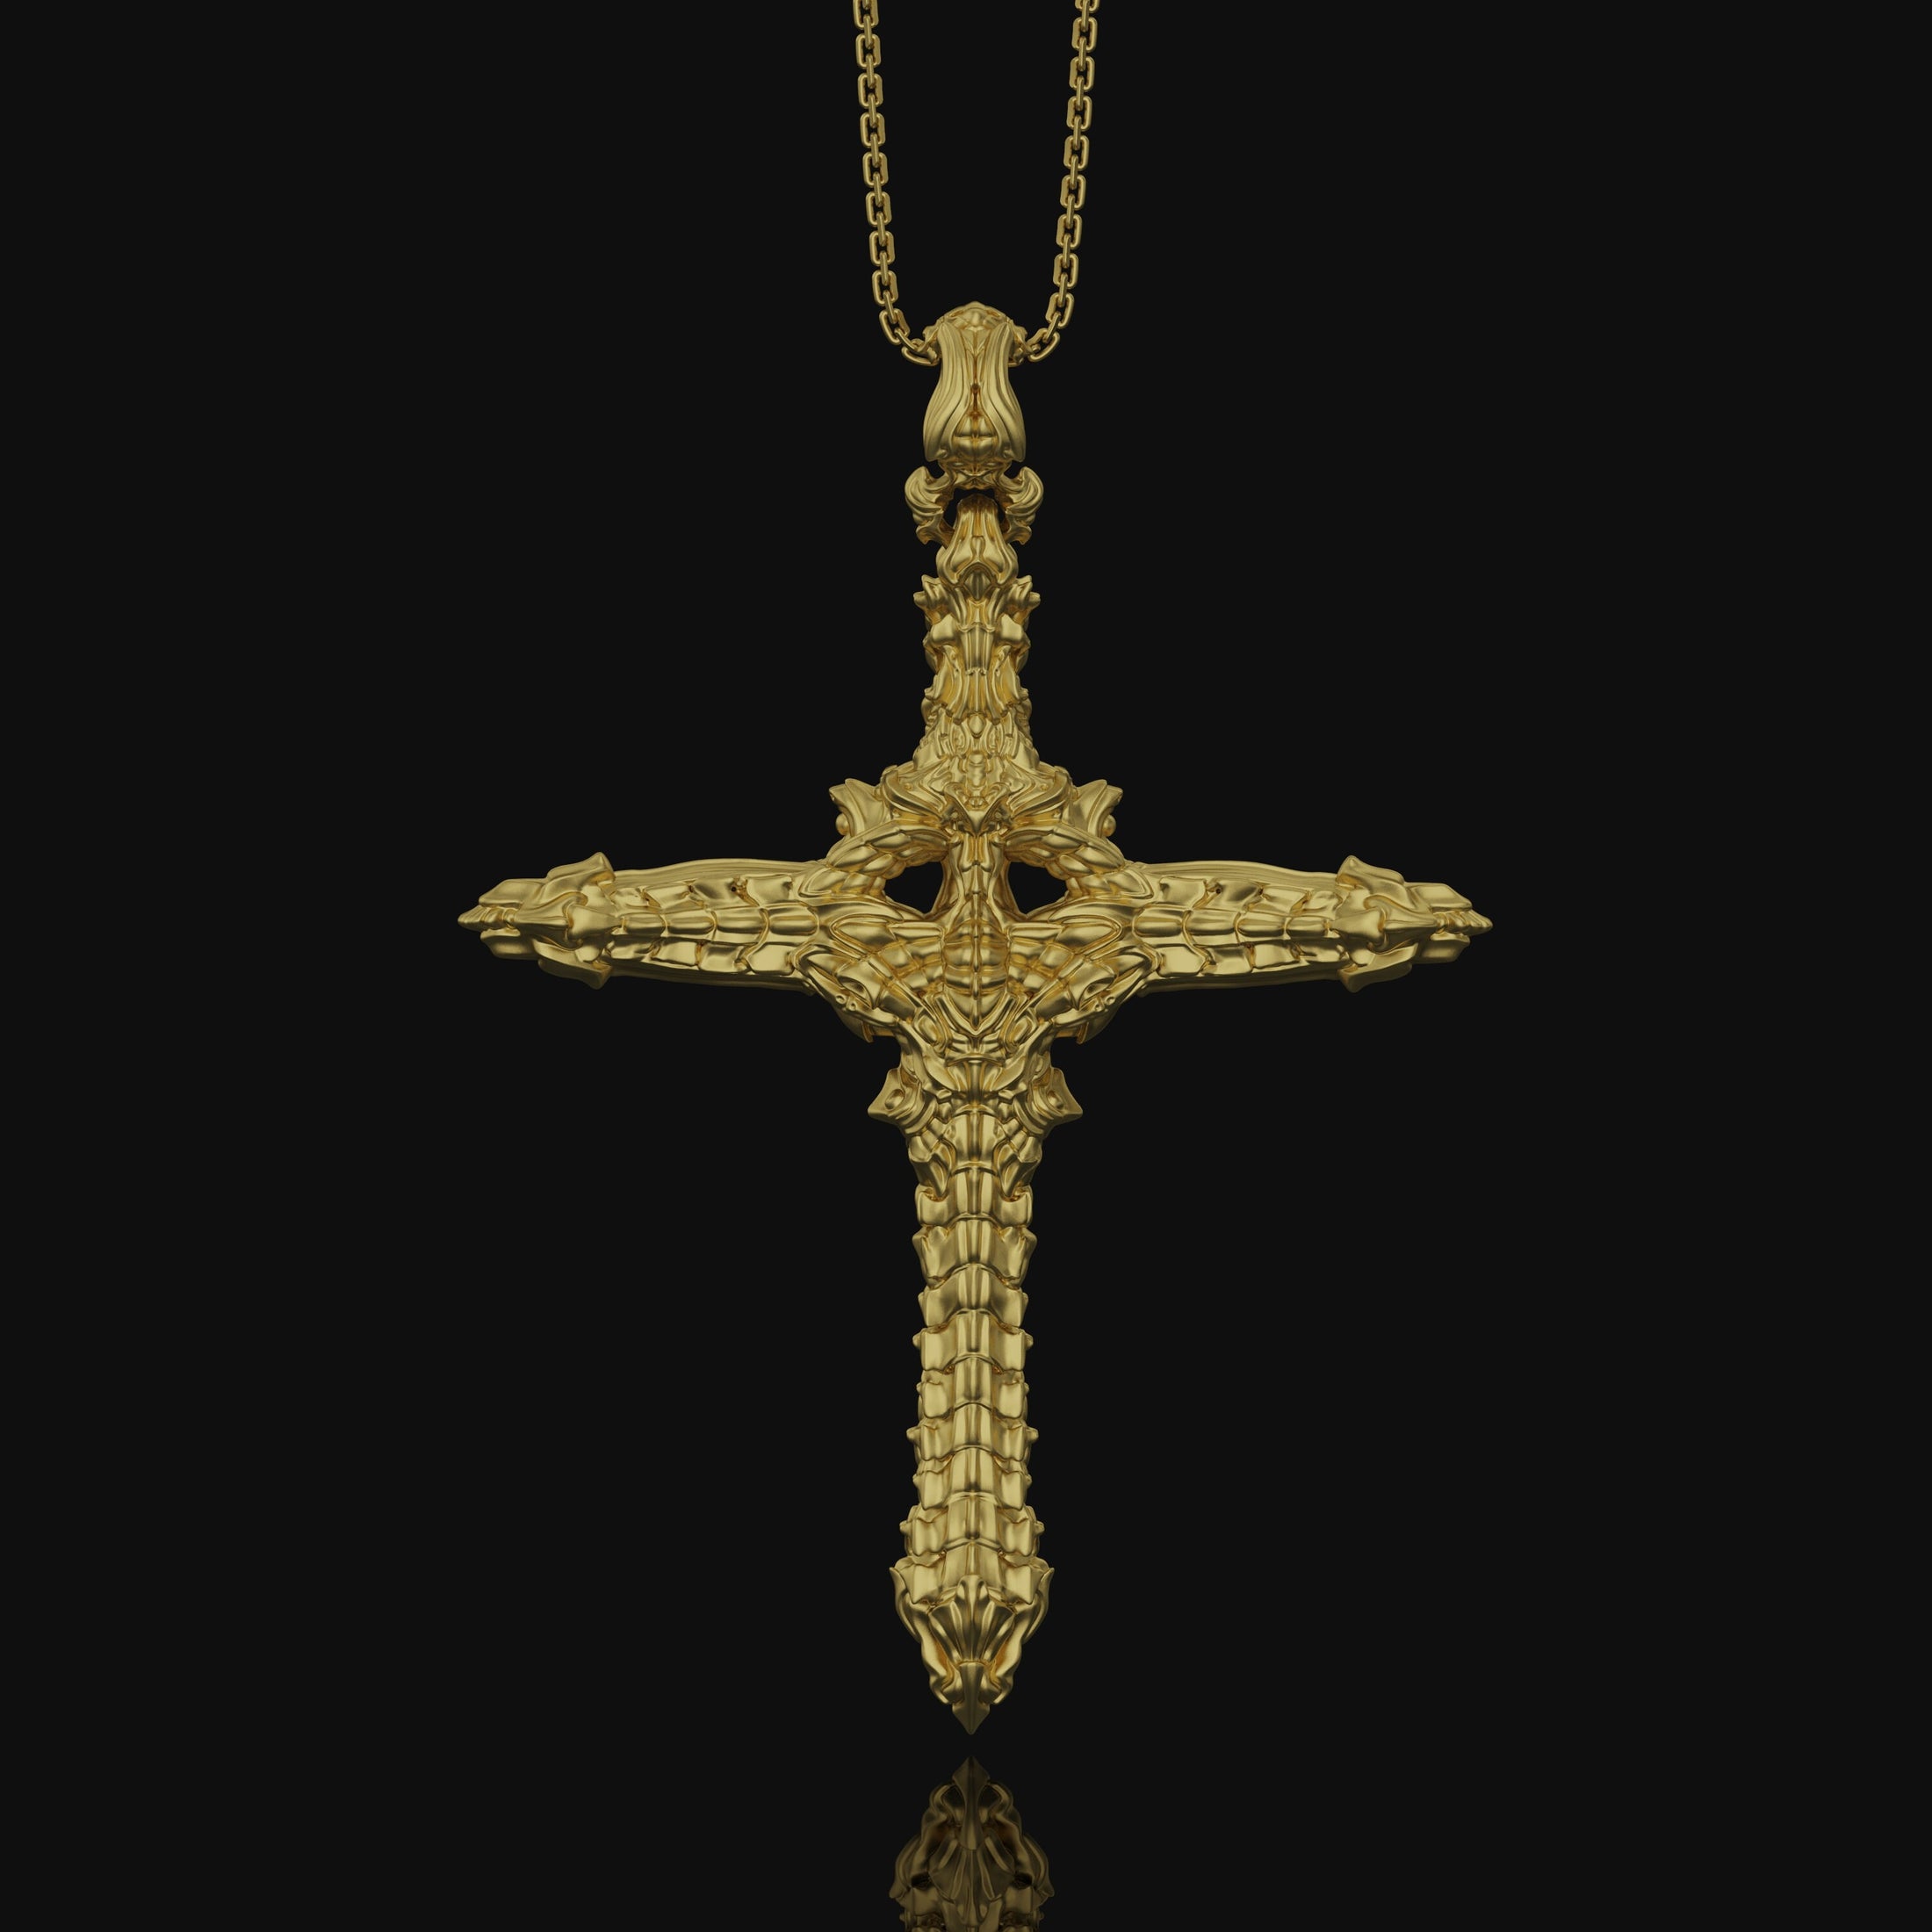 Gothic Cross Necklace, Christmas Gift, Biomechanical Cross, Men's Gothic Jewelry, Women's Cross, Gothic Christian Gift Gold Finish